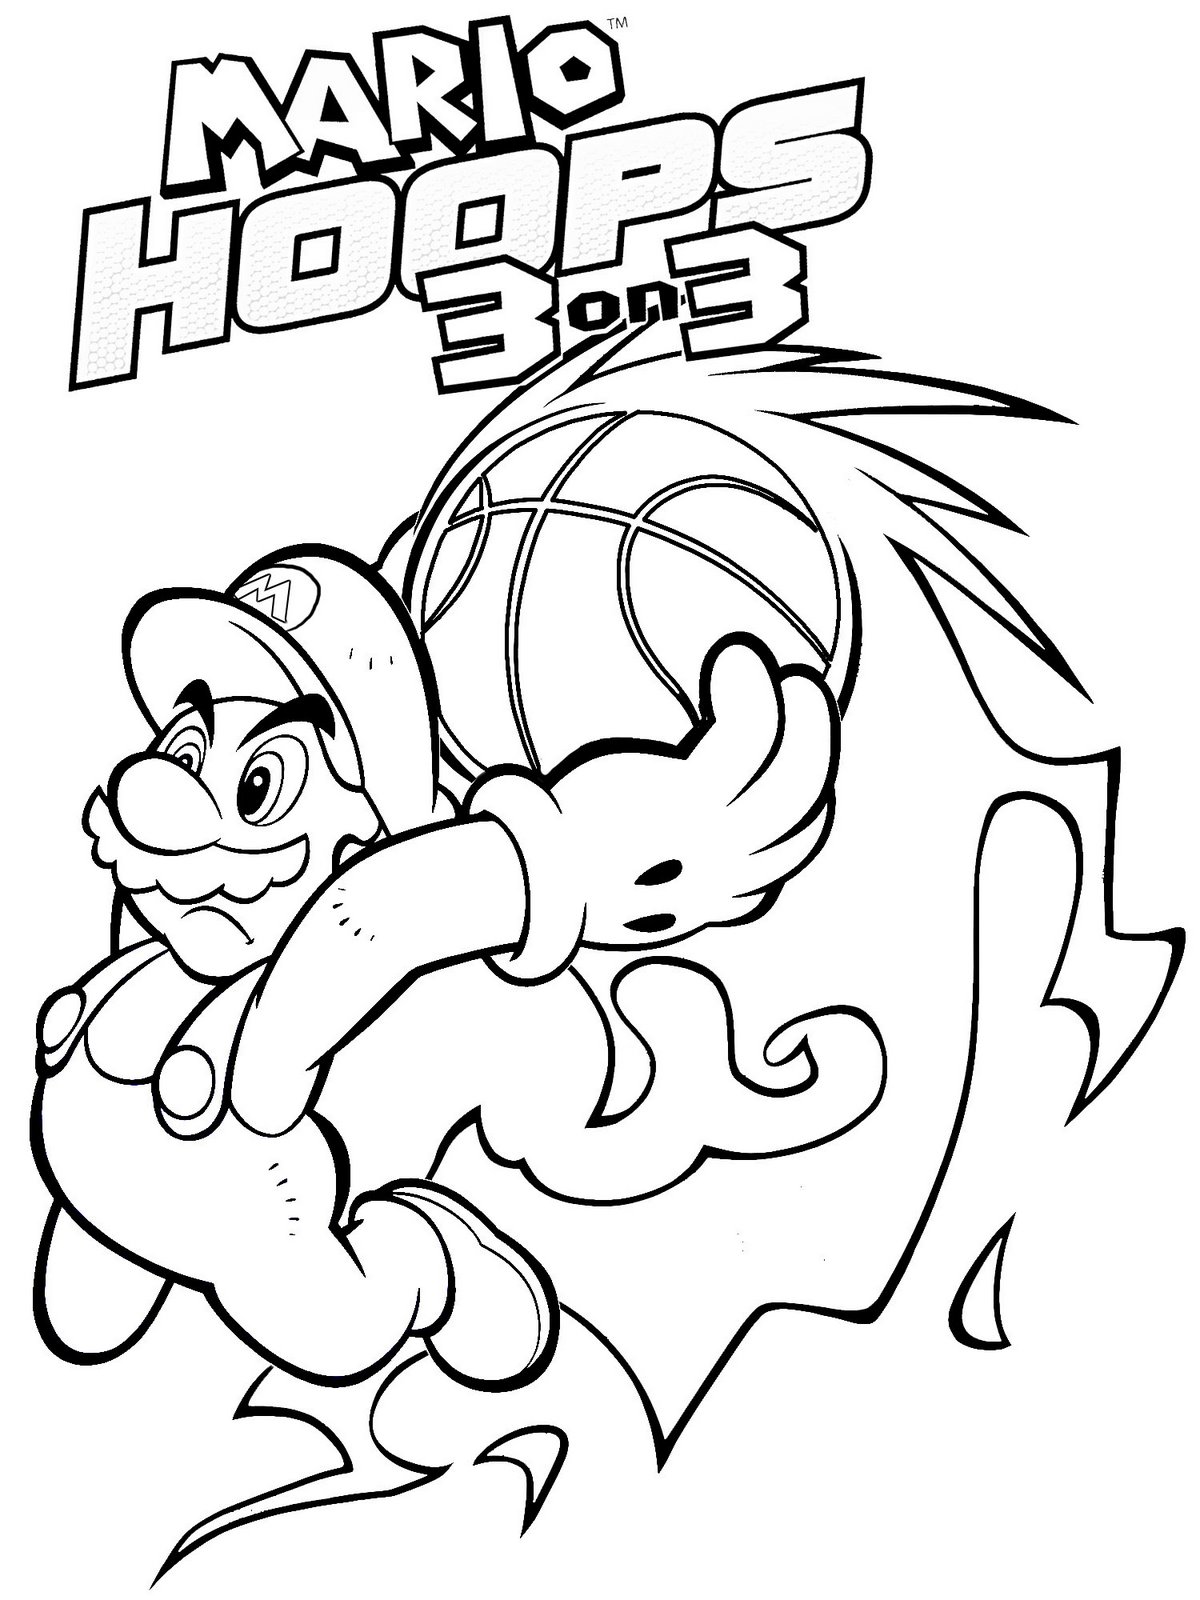 Super Mario: Coloring Book For Adults, 30 Super Mario, Princes, Luigi,  Donkey Kong, Yoshi Coloring Pages, For Teens, Super Mario Characters